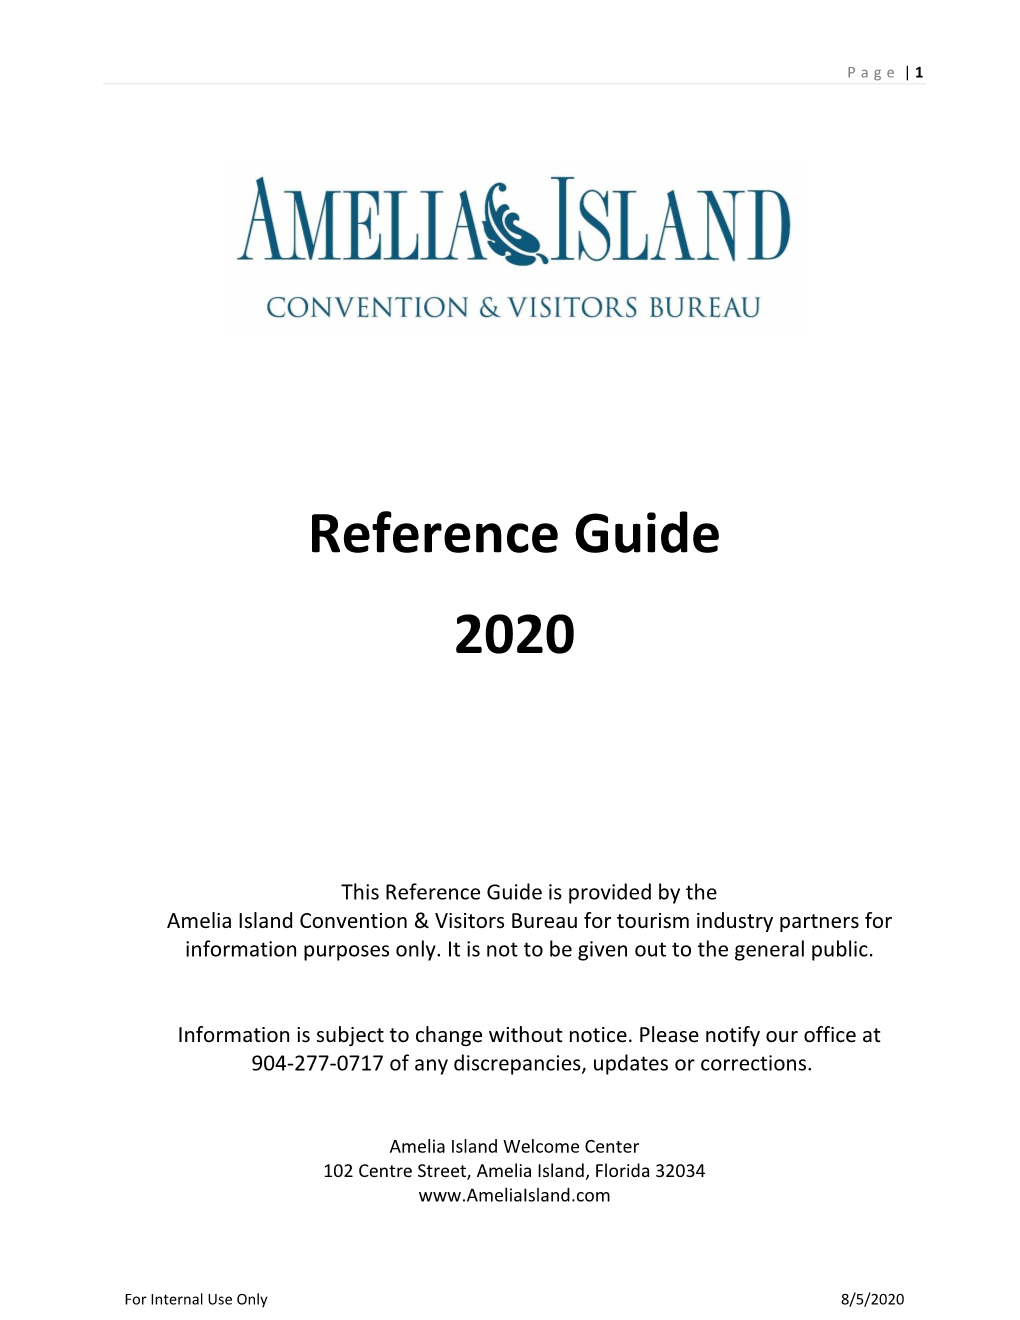 Reference Guide 2020